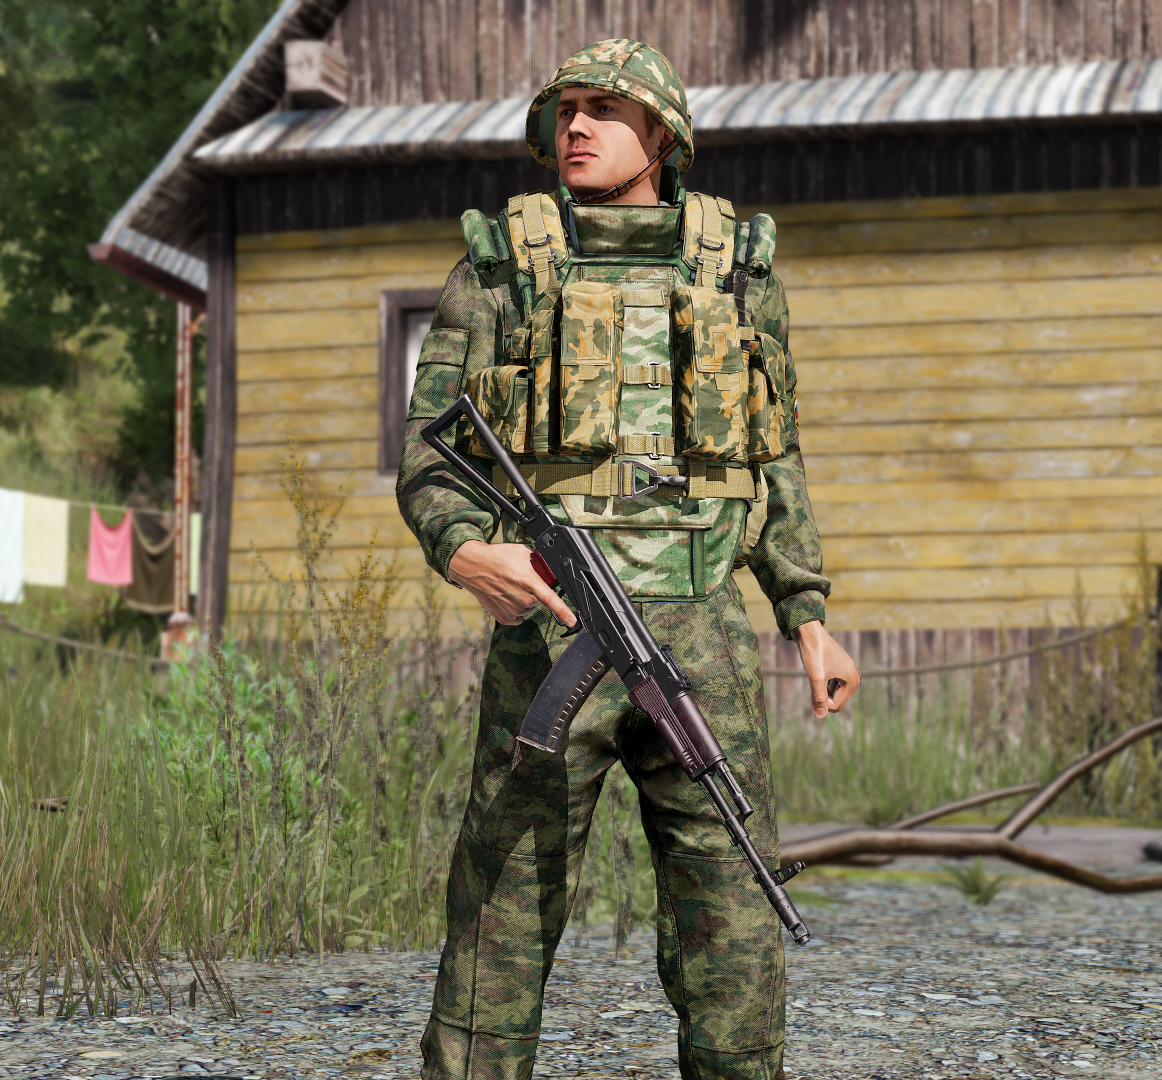 Just a little Russian kit that I thought looked pretty neat.

This is what I'm trying to get my Russian kit IRL to look like. I've got the uniform, body armor, and helmet. Just need the chest rig and helmet cover :)
#Arma3 #ArmaPlatform #ArmaPhotography